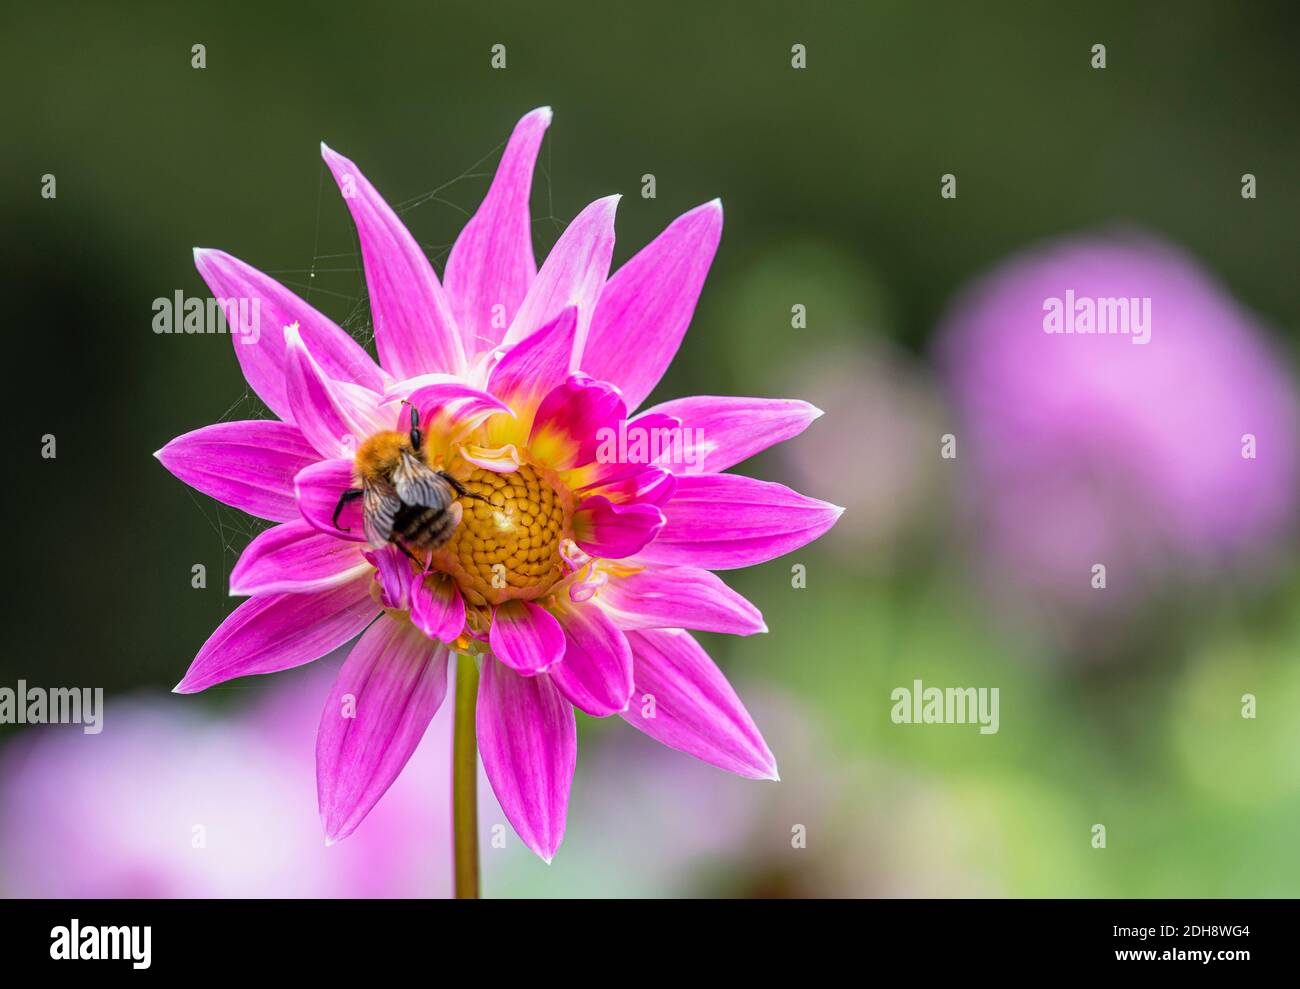 Dahlia, Bumble bee on pink coloured flower growing outdoor. Stock Photo